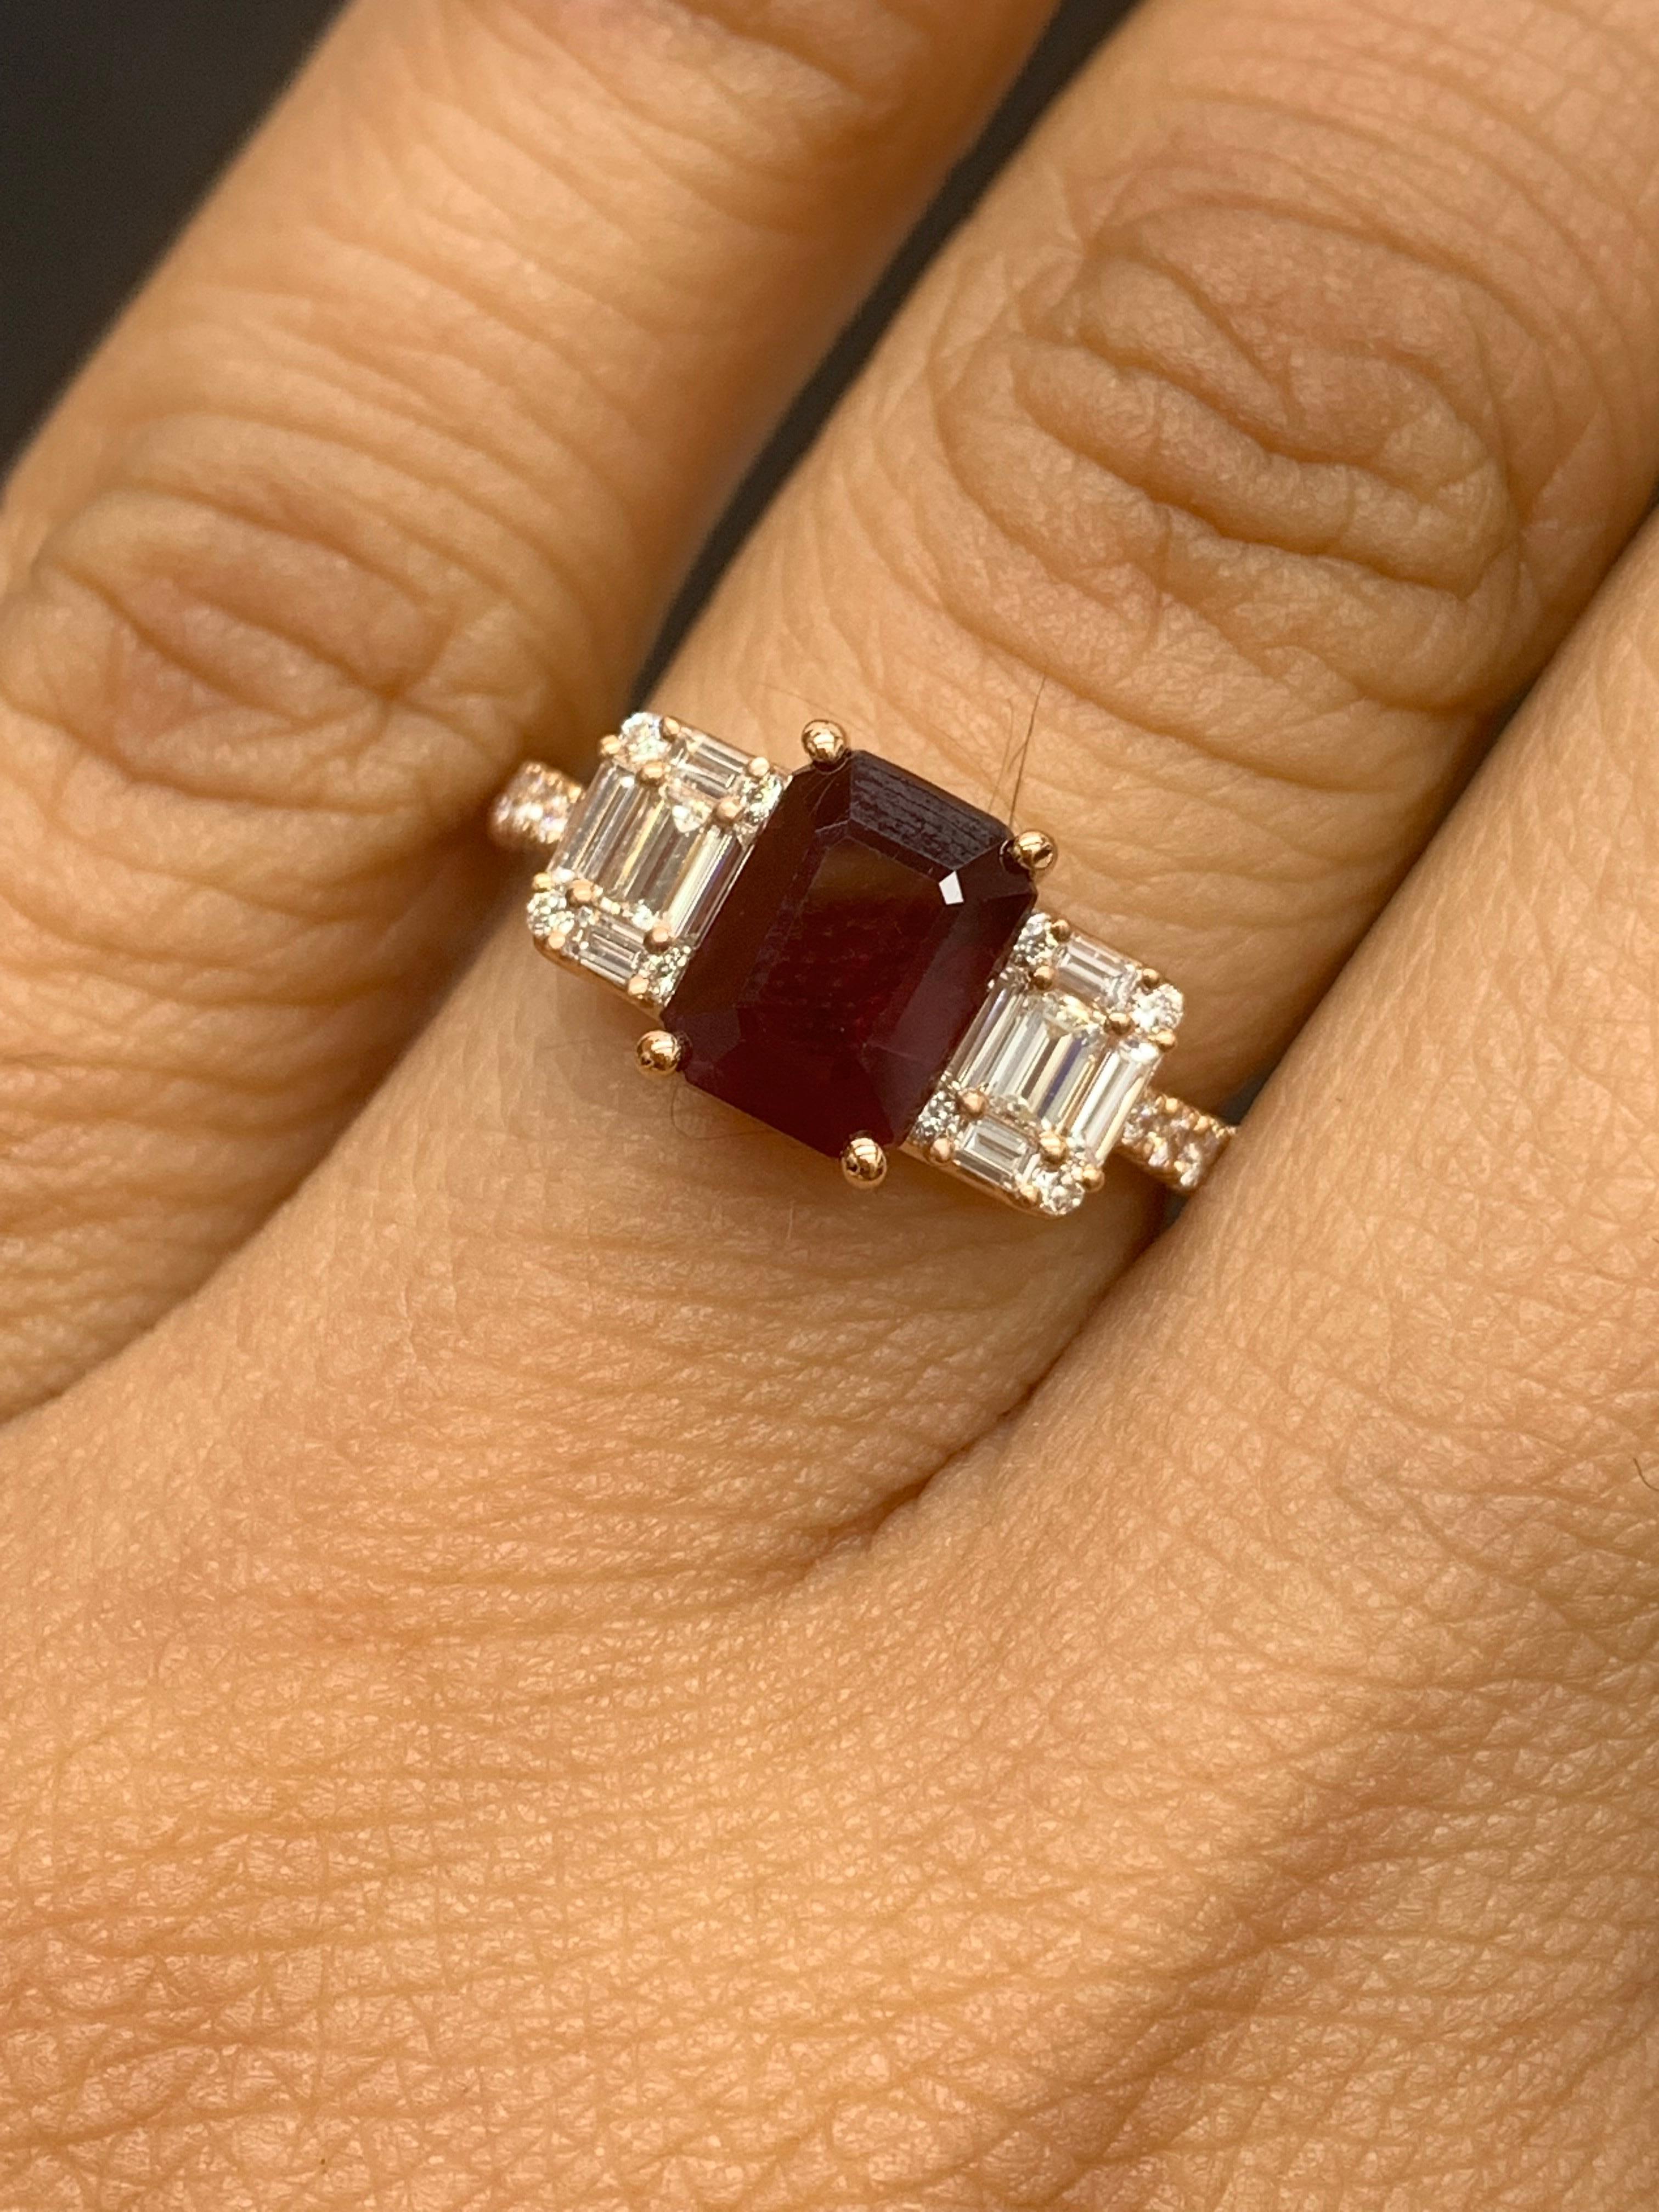 A stunning ring showcasing a rich emerald cut Ruby weighing 1.87 carats surrounded by diamonds on both sides. 28 diamonds on each side weighing 0.58 carats in total. Made in 18K Rose Gold.